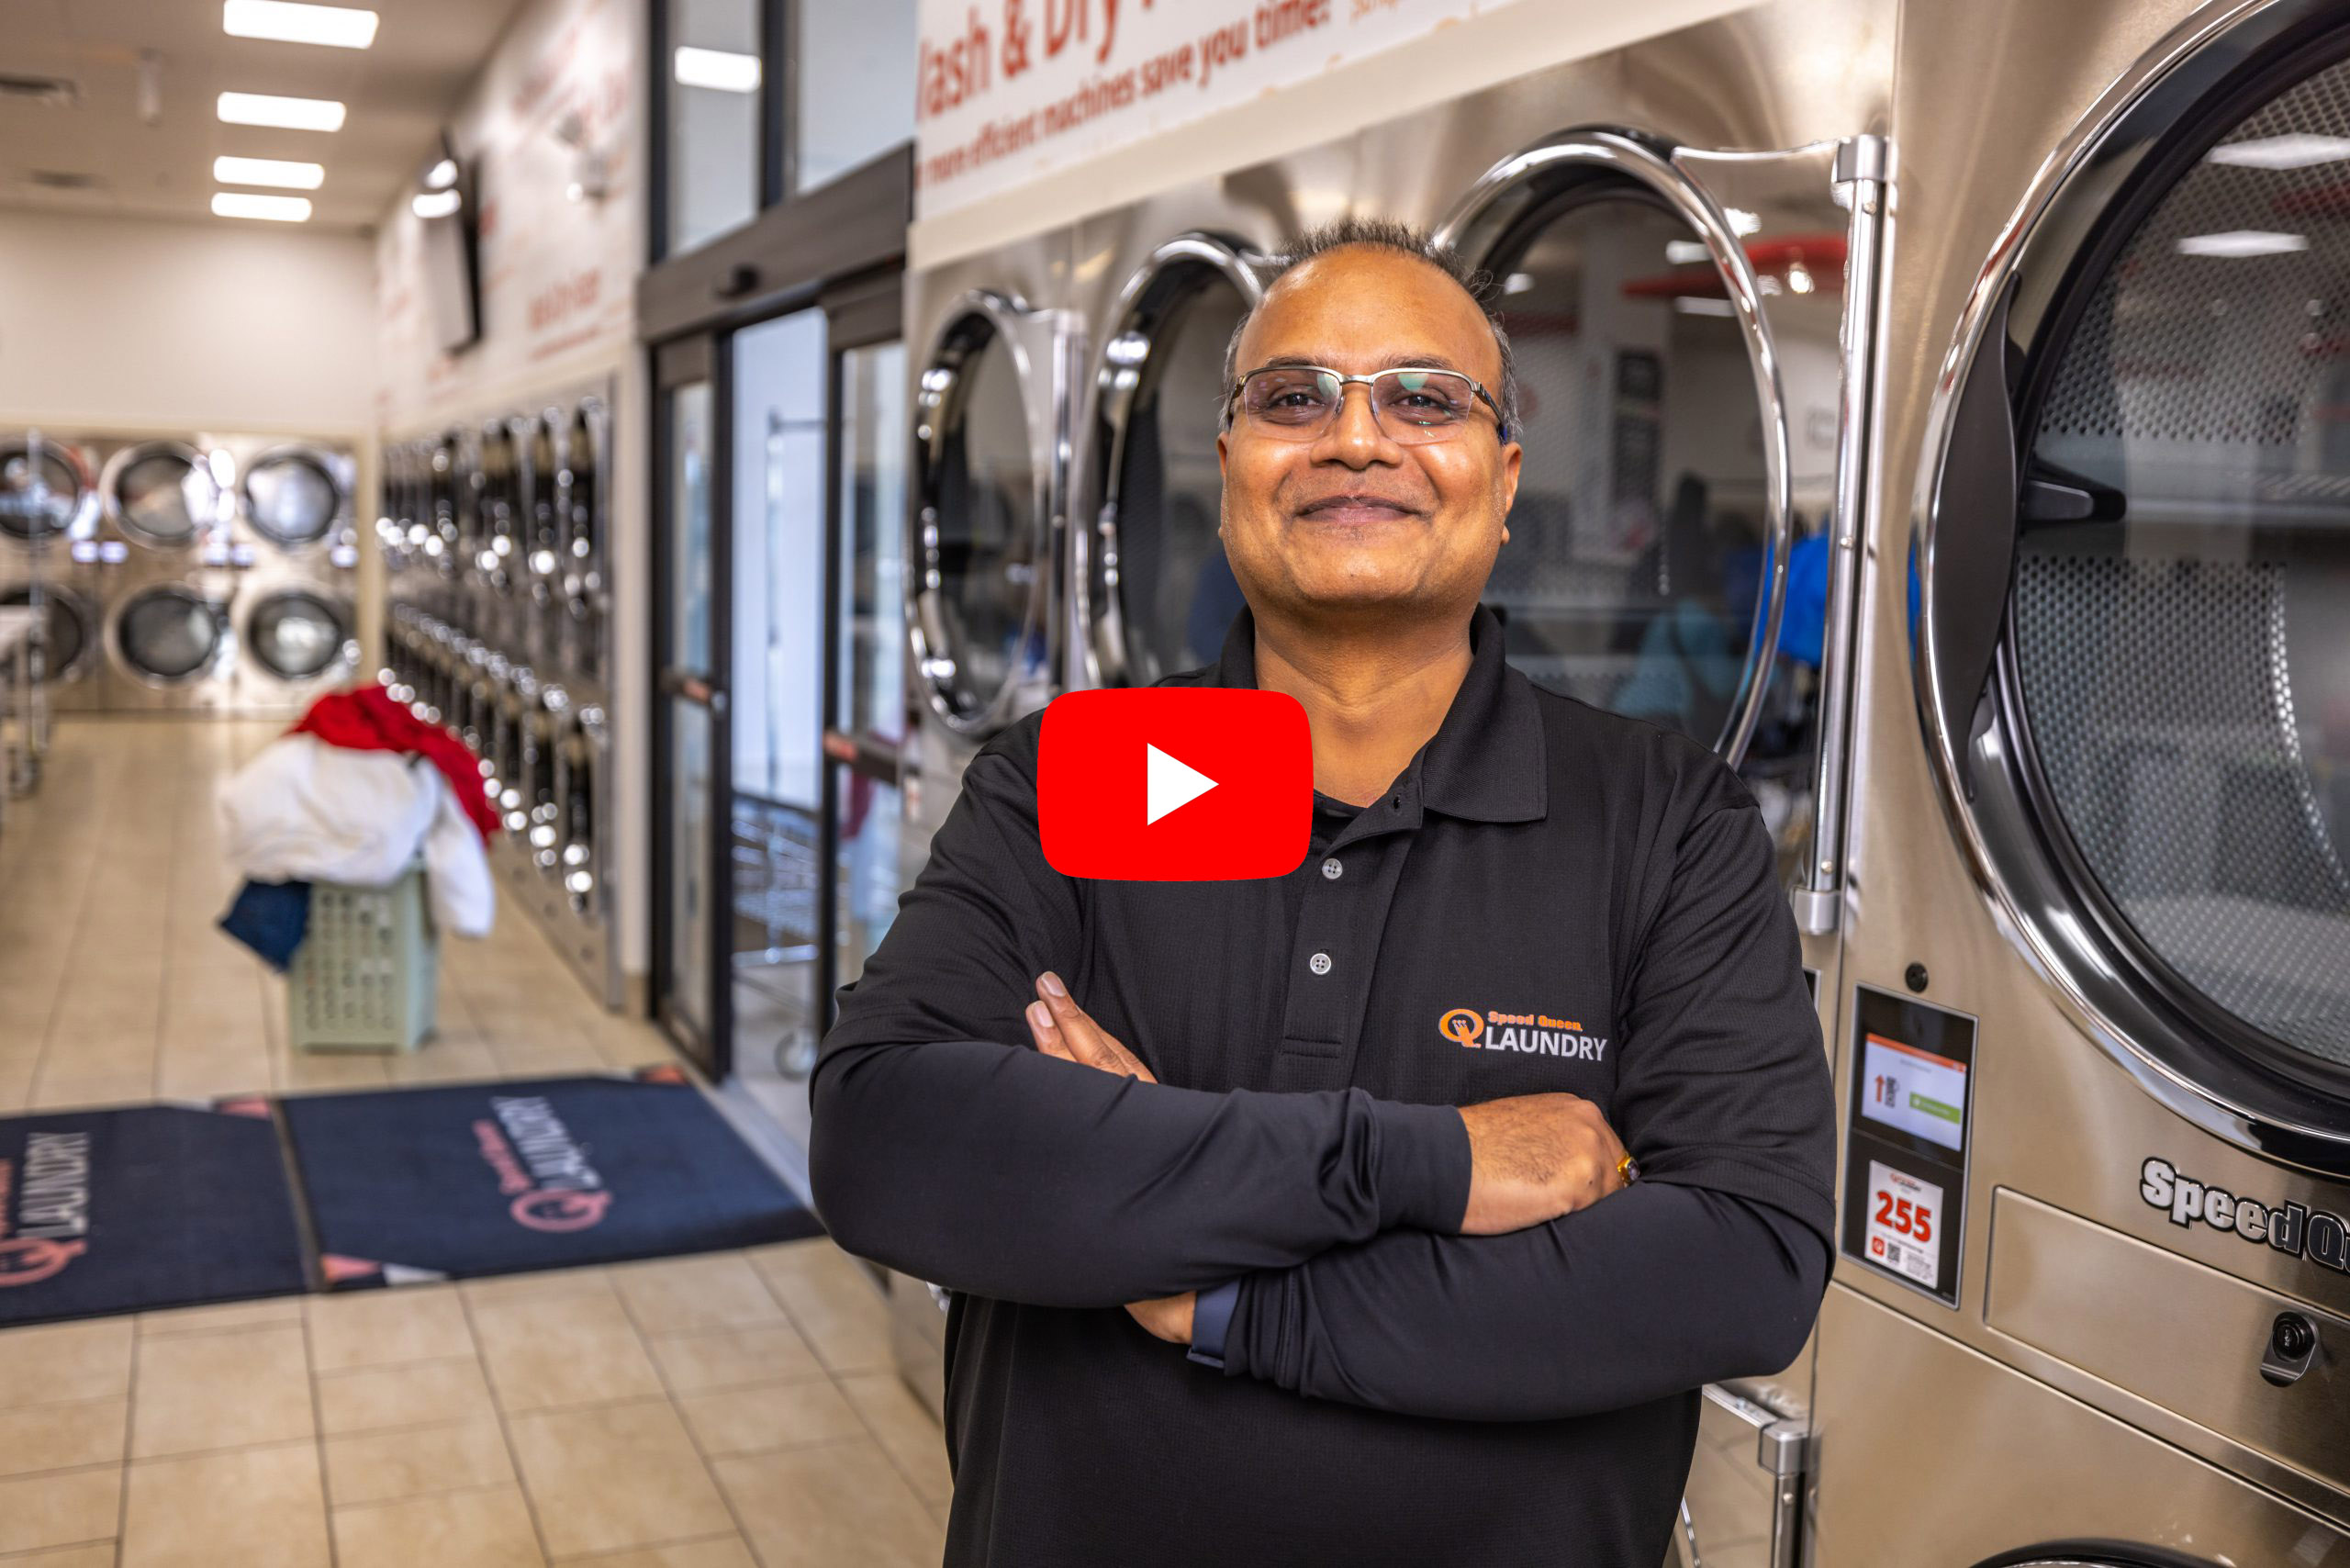 Sanjay standing proudly in his laundromat